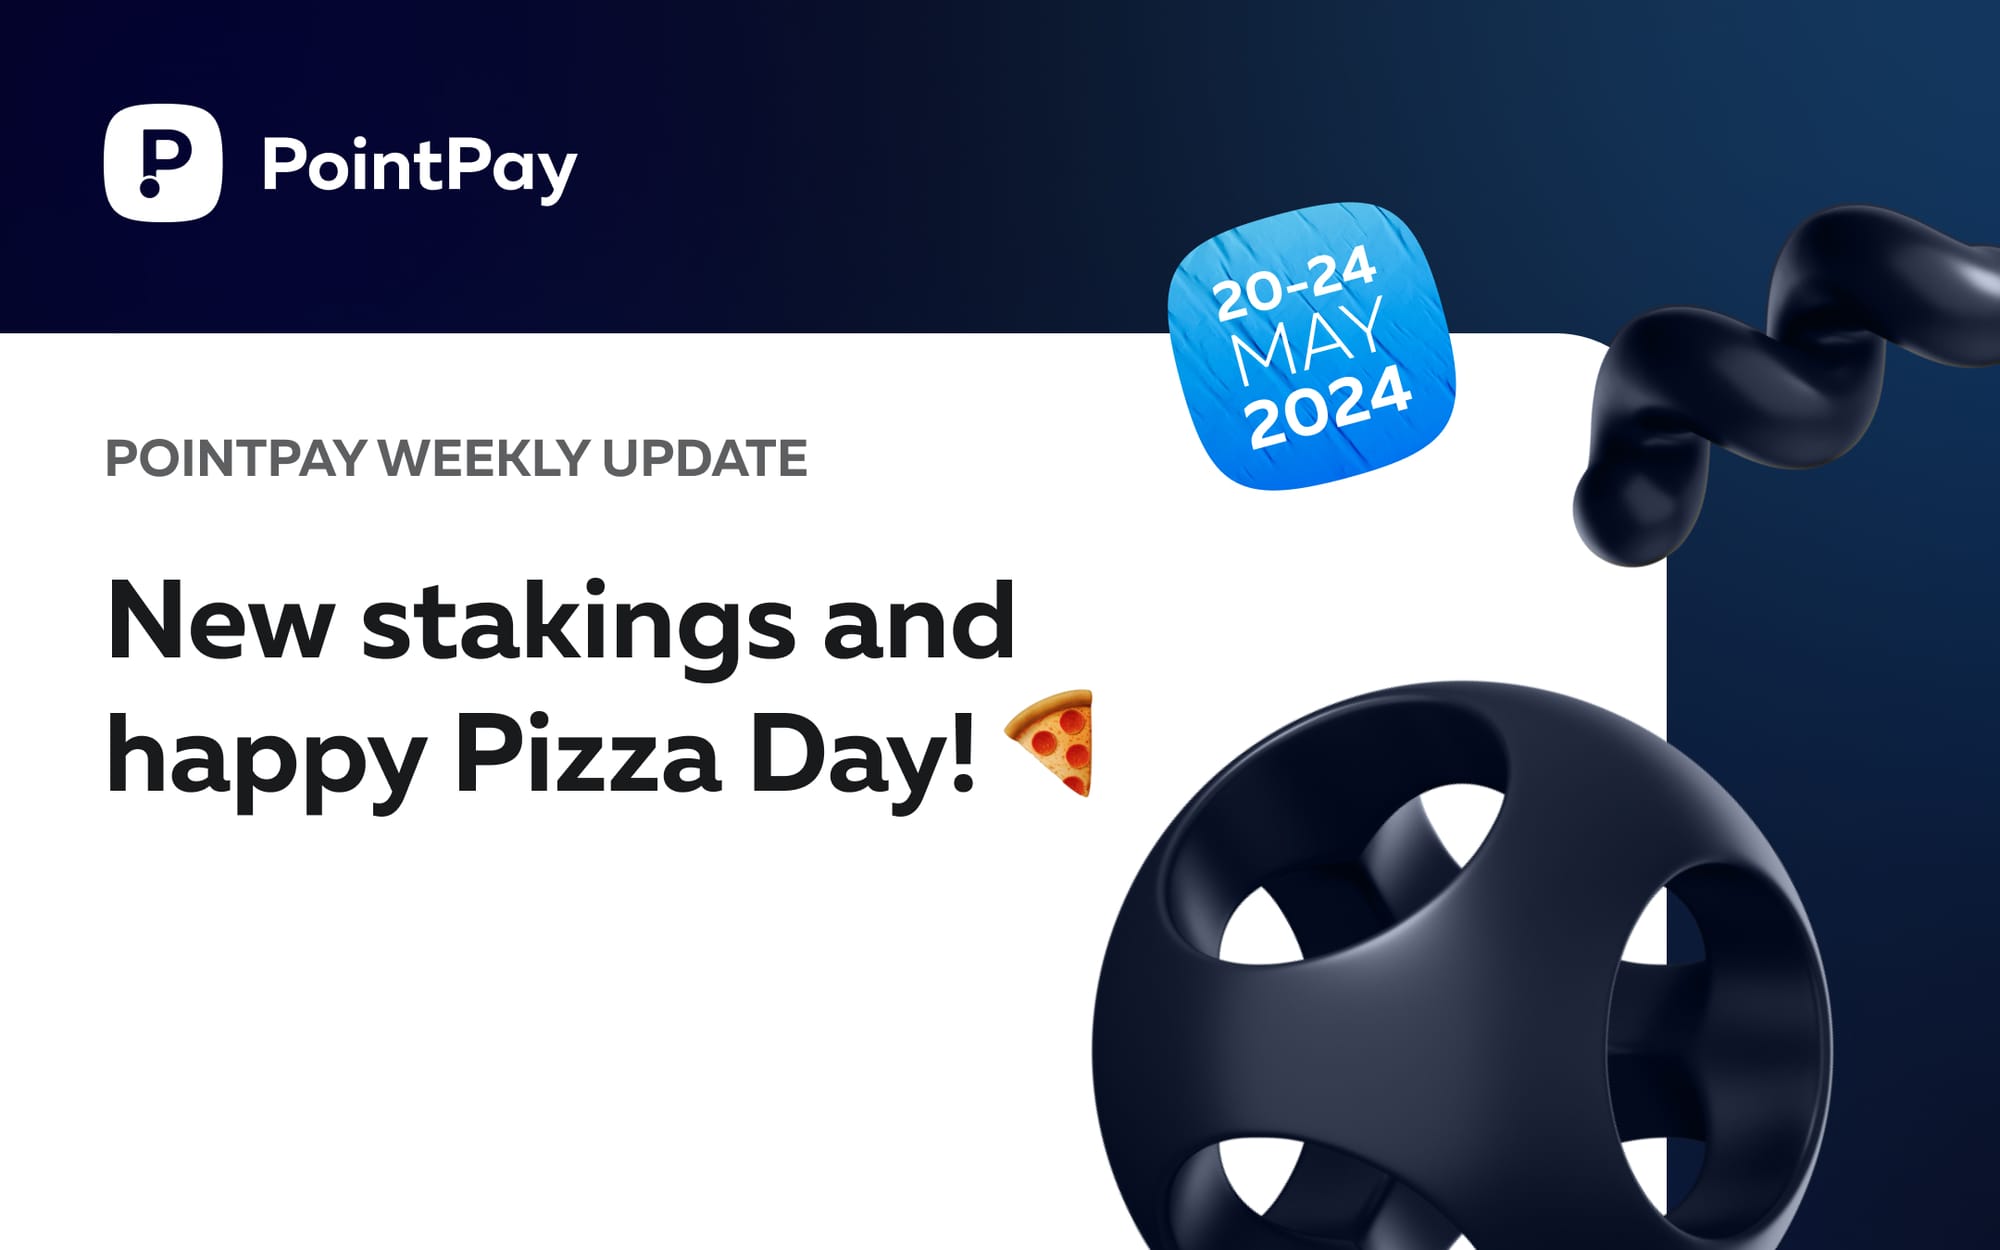 PointPay Weekly Update (20-24 May)